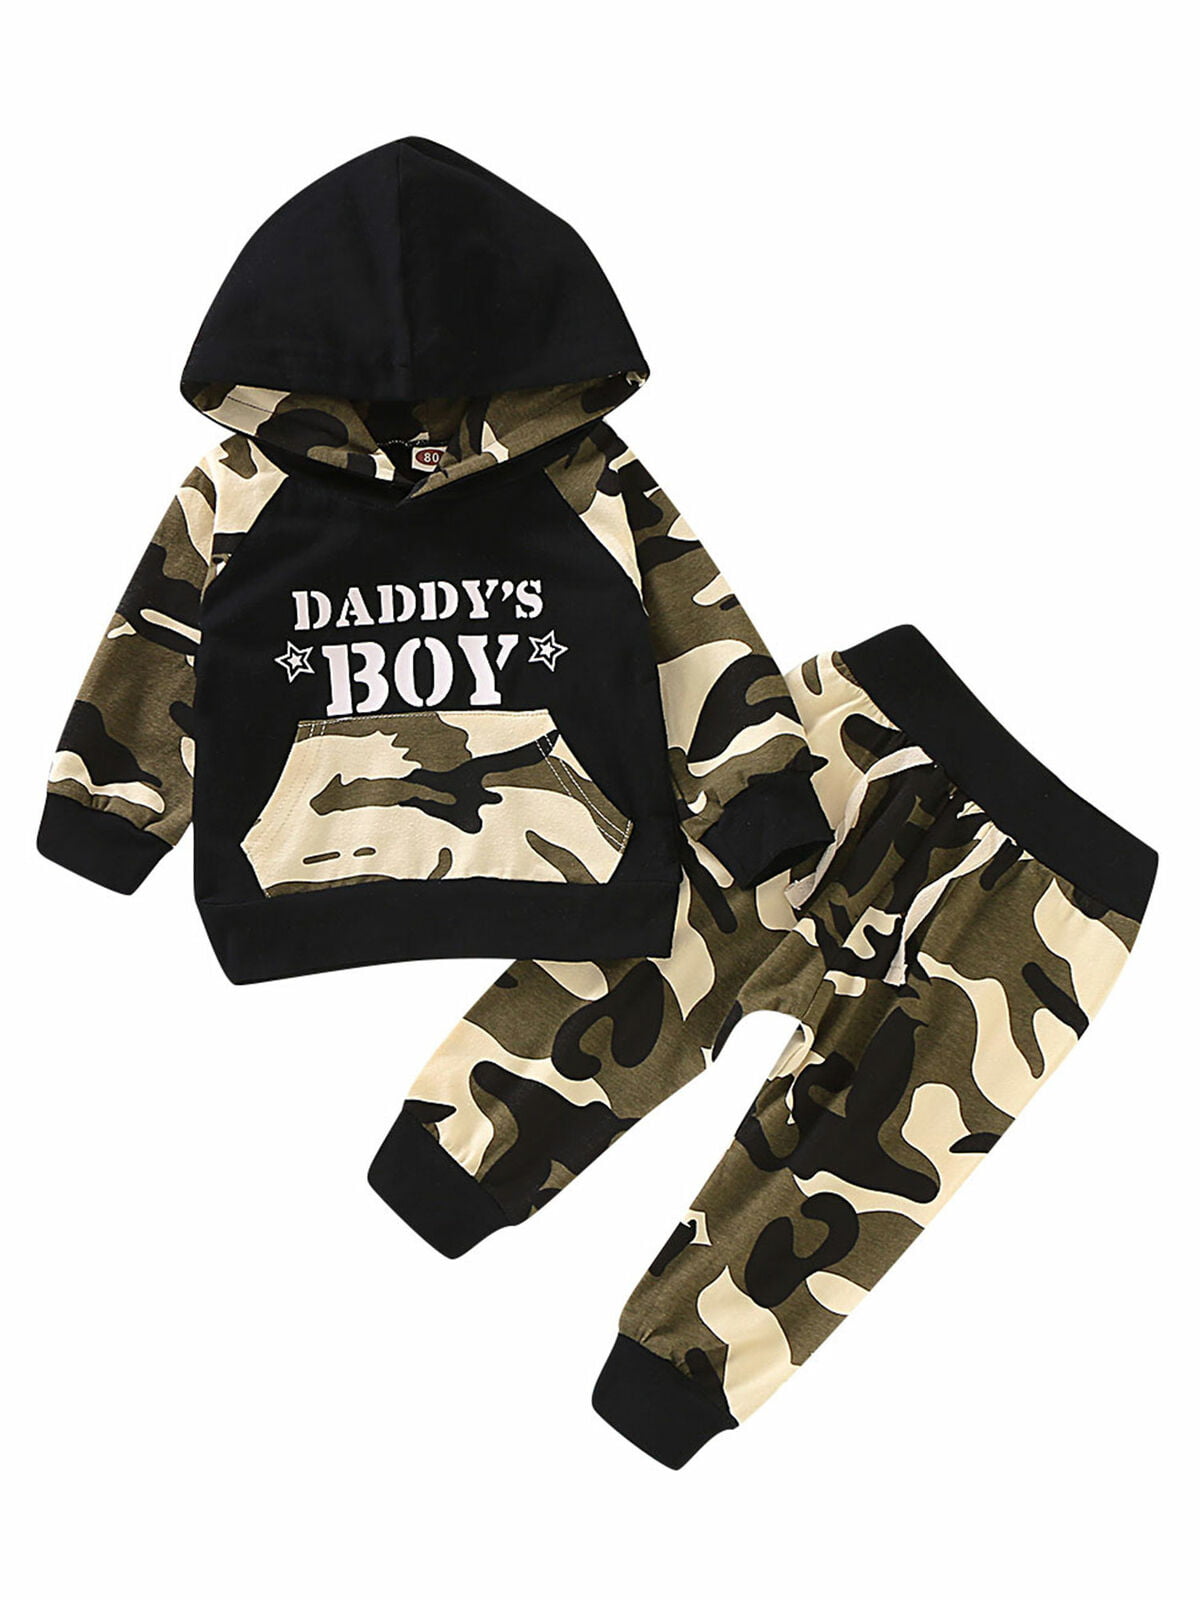 ️Newborn Baby Boys Camouflage Hooded Tops+Pants Tracksuit Outfits Set Clothes 